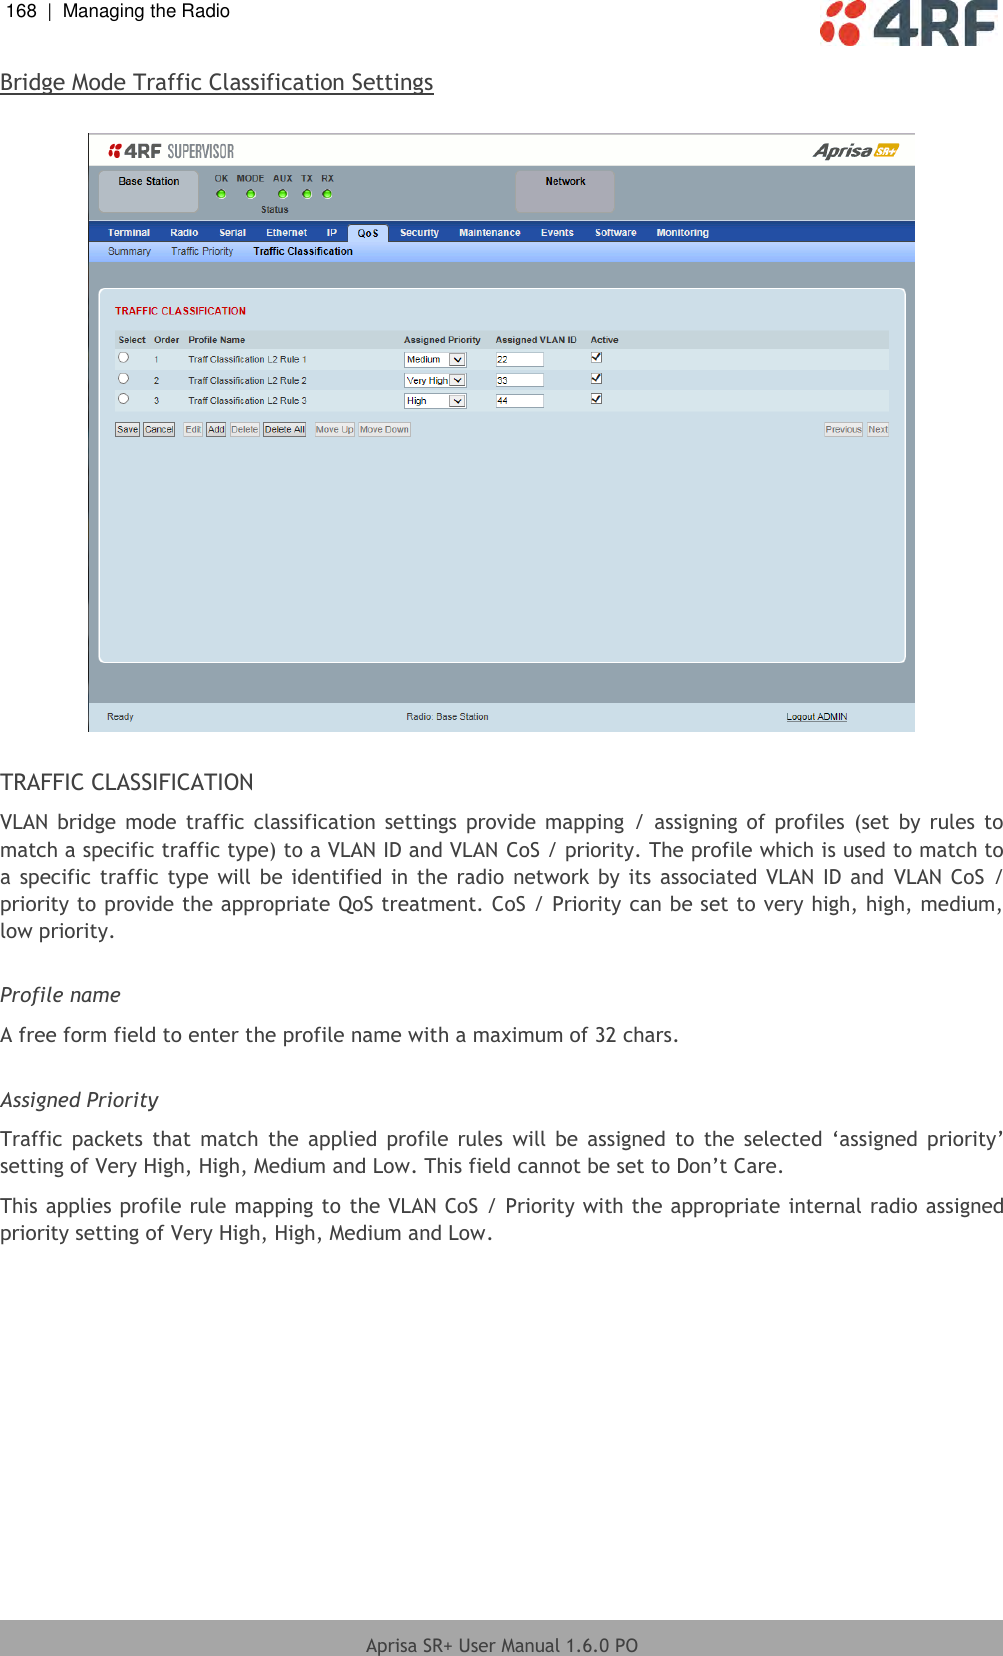 168  |  Managing the Radio   Aprisa SR+ User Manual 1.6.0 PO  Bridge Mode Traffic Classification Settings    TRAFFIC CLASSIFICATION VLAN  bridge  mode traffic  classification  settings  provide  mapping  /  assigning  of profiles (set  by  rules to match a specific traffic type) to a VLAN ID and VLAN CoS / priority. The profile which is used to match to a specific  traffic type  will be identified in  the radio  network  by its associated VLAN ID  and  VLAN CoS  / priority to provide the appropriate QoS treatment. CoS / Priority can be set to very high, high, medium, low priority.    Profile name A free form field to enter the profile name with a maximum of 32 chars.  Assigned Priority Traffic  packets  that match  the  applied  profile  rules  will  be  assigned  to  the  selected  ‘assigned  priority’ setting of Very High, High, Medium and Low. This field cannot be set to Don’t Care. This applies profile rule mapping to the VLAN CoS / Priority with the appropriate internal radio assigned priority setting of Very High, High, Medium and Low.    